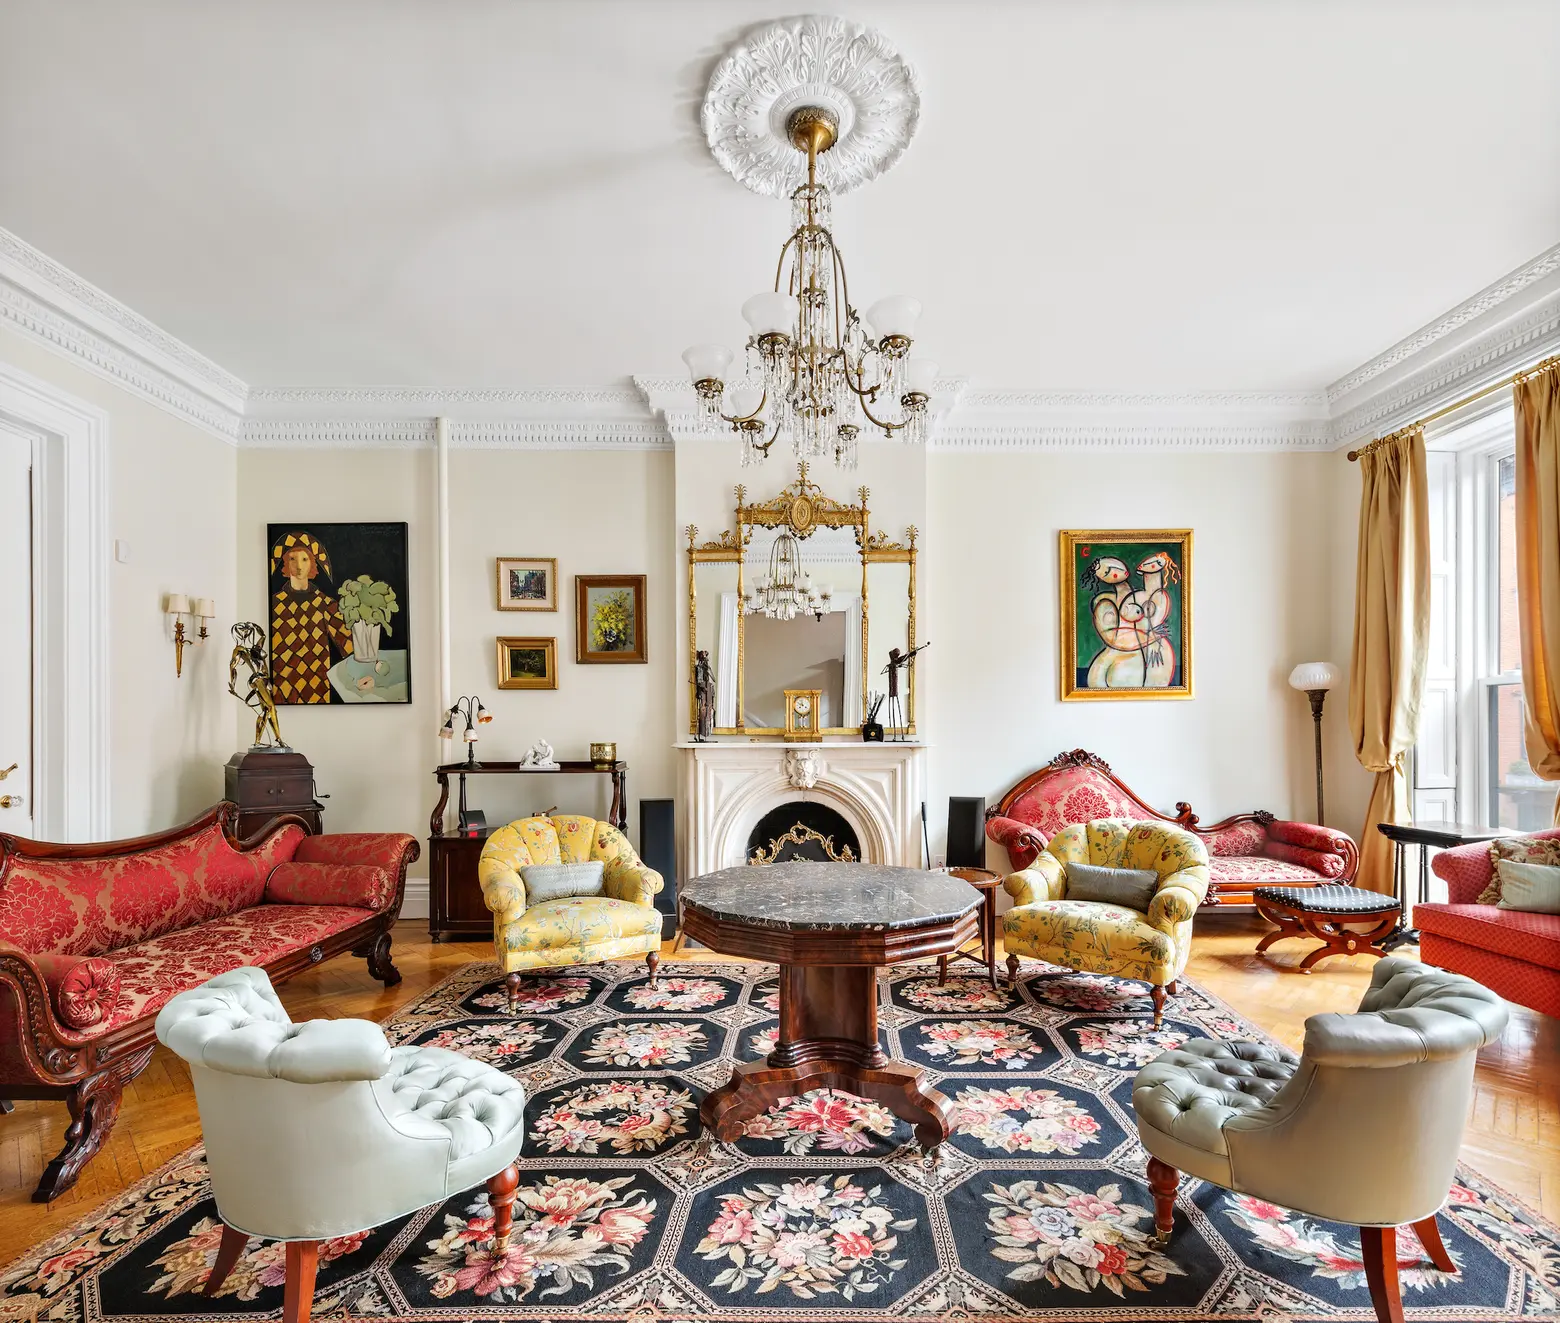 This $7.3M Brooklyn Heights townhouse is ready to be both home and office